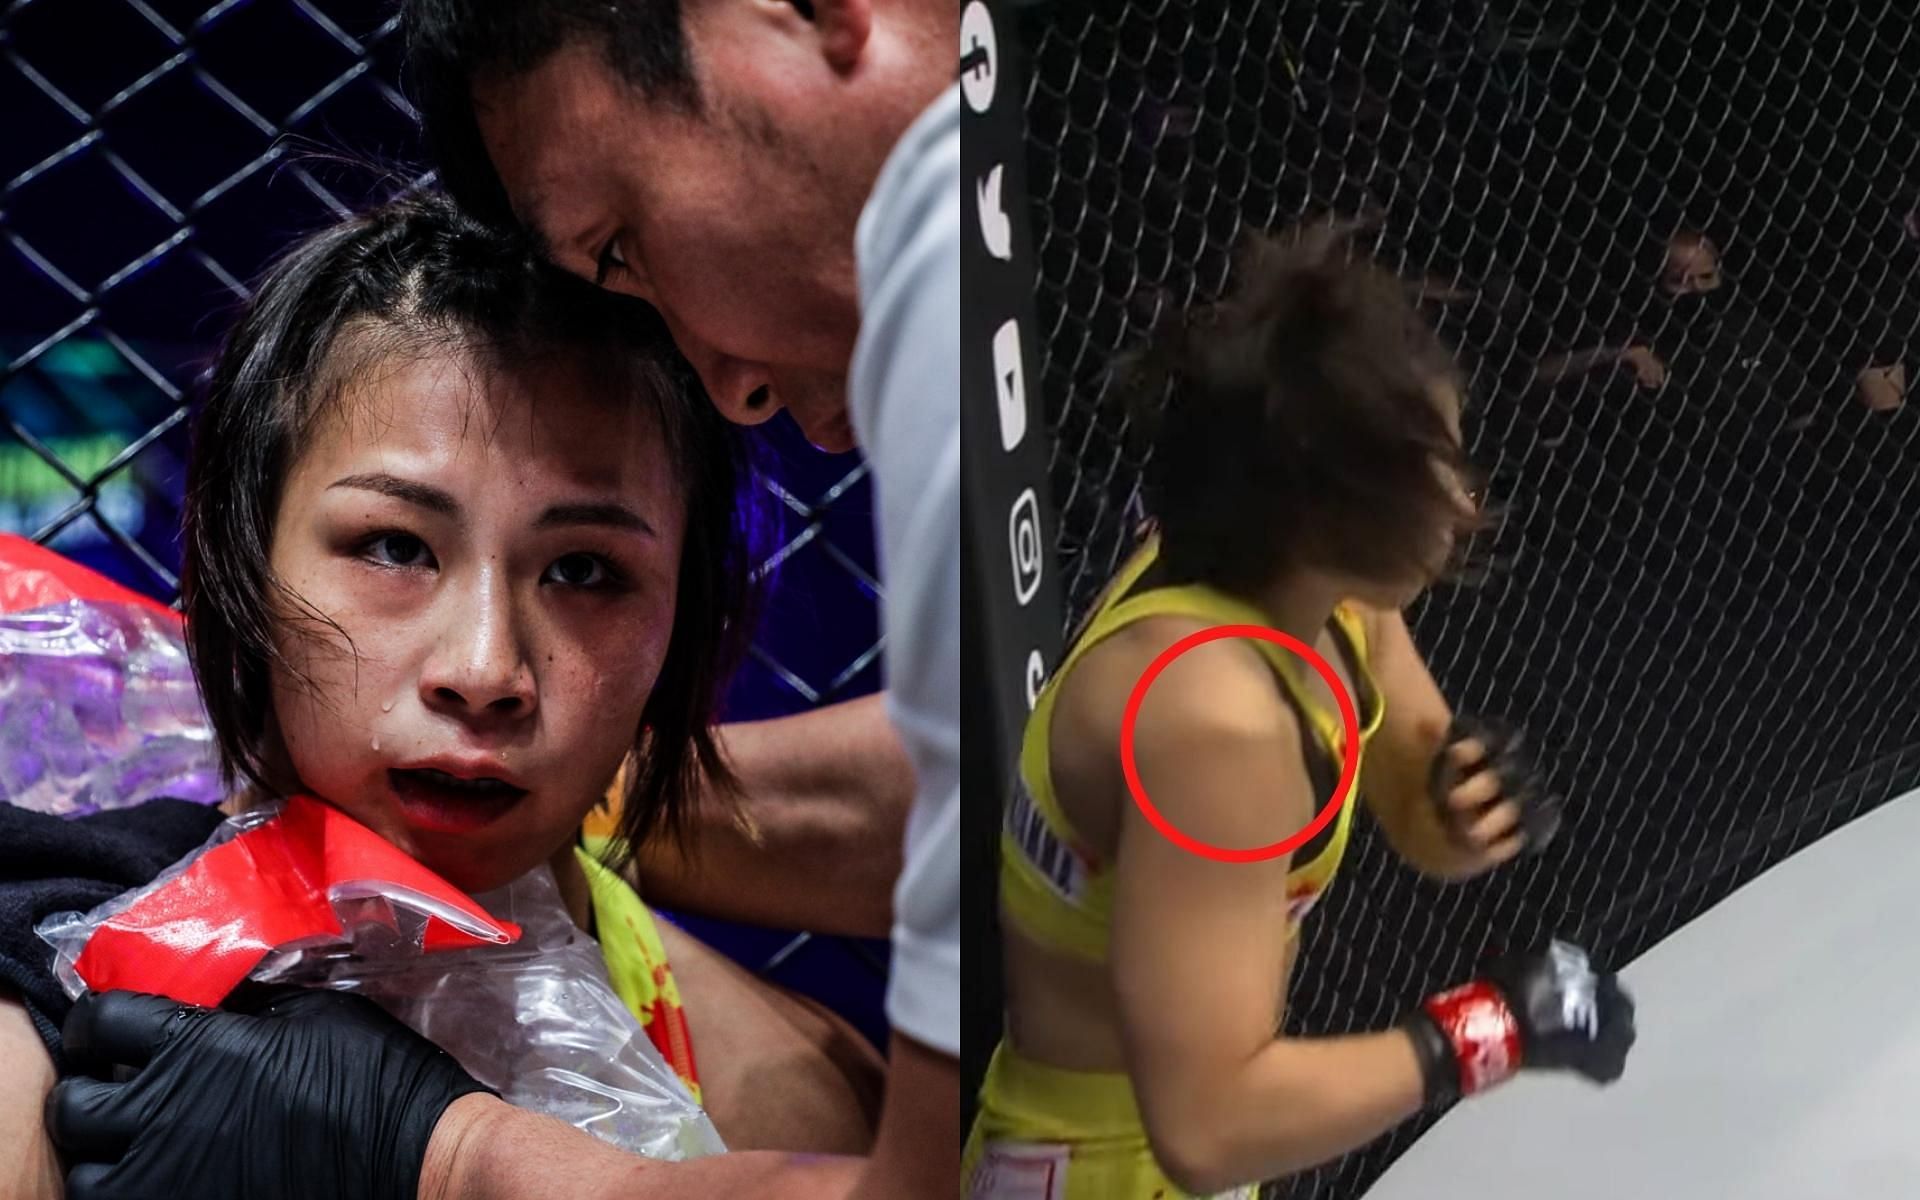 ONE Championship strawweight Ayaka Miura suffered a nasty shoulder injury at ONE 156. (Images courtesy of ONE Championship)